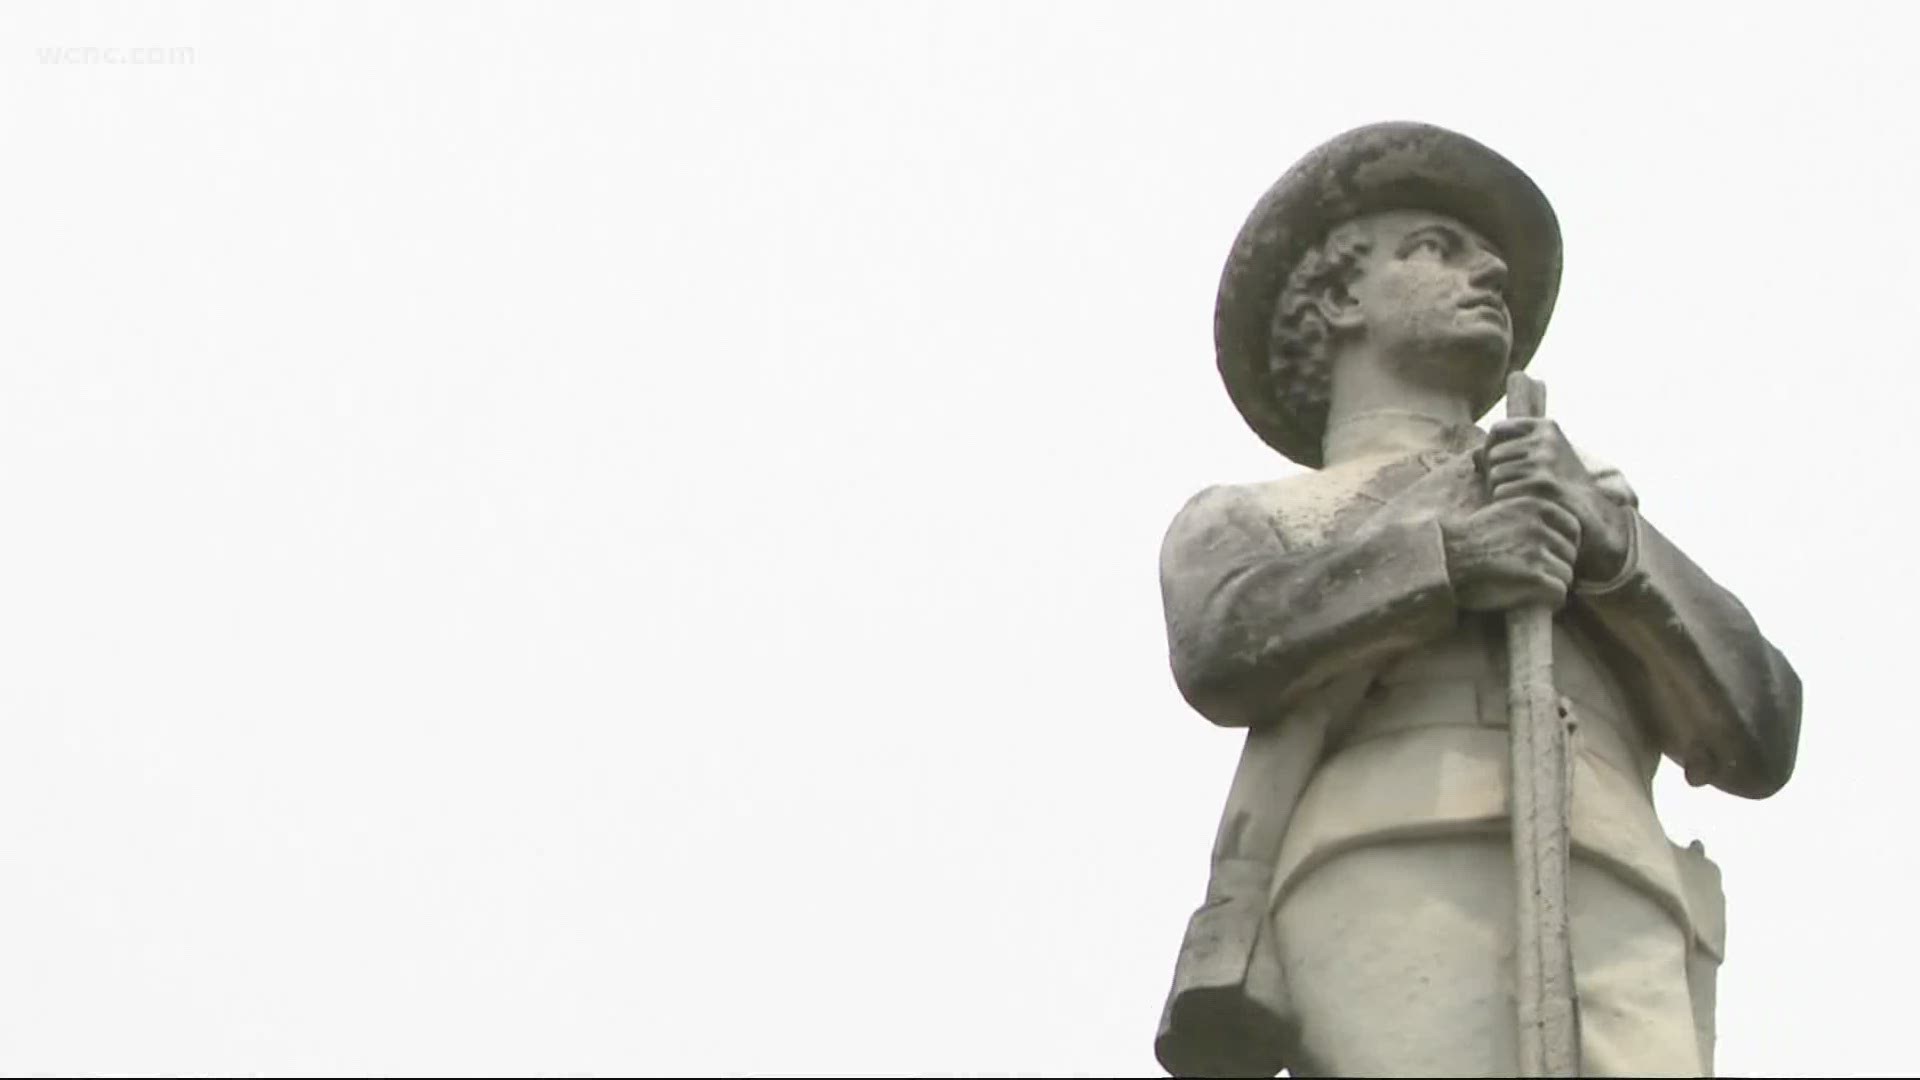 Gaston County leaders hed a debate about the confederate statue in Gastonia Tuesday evening.